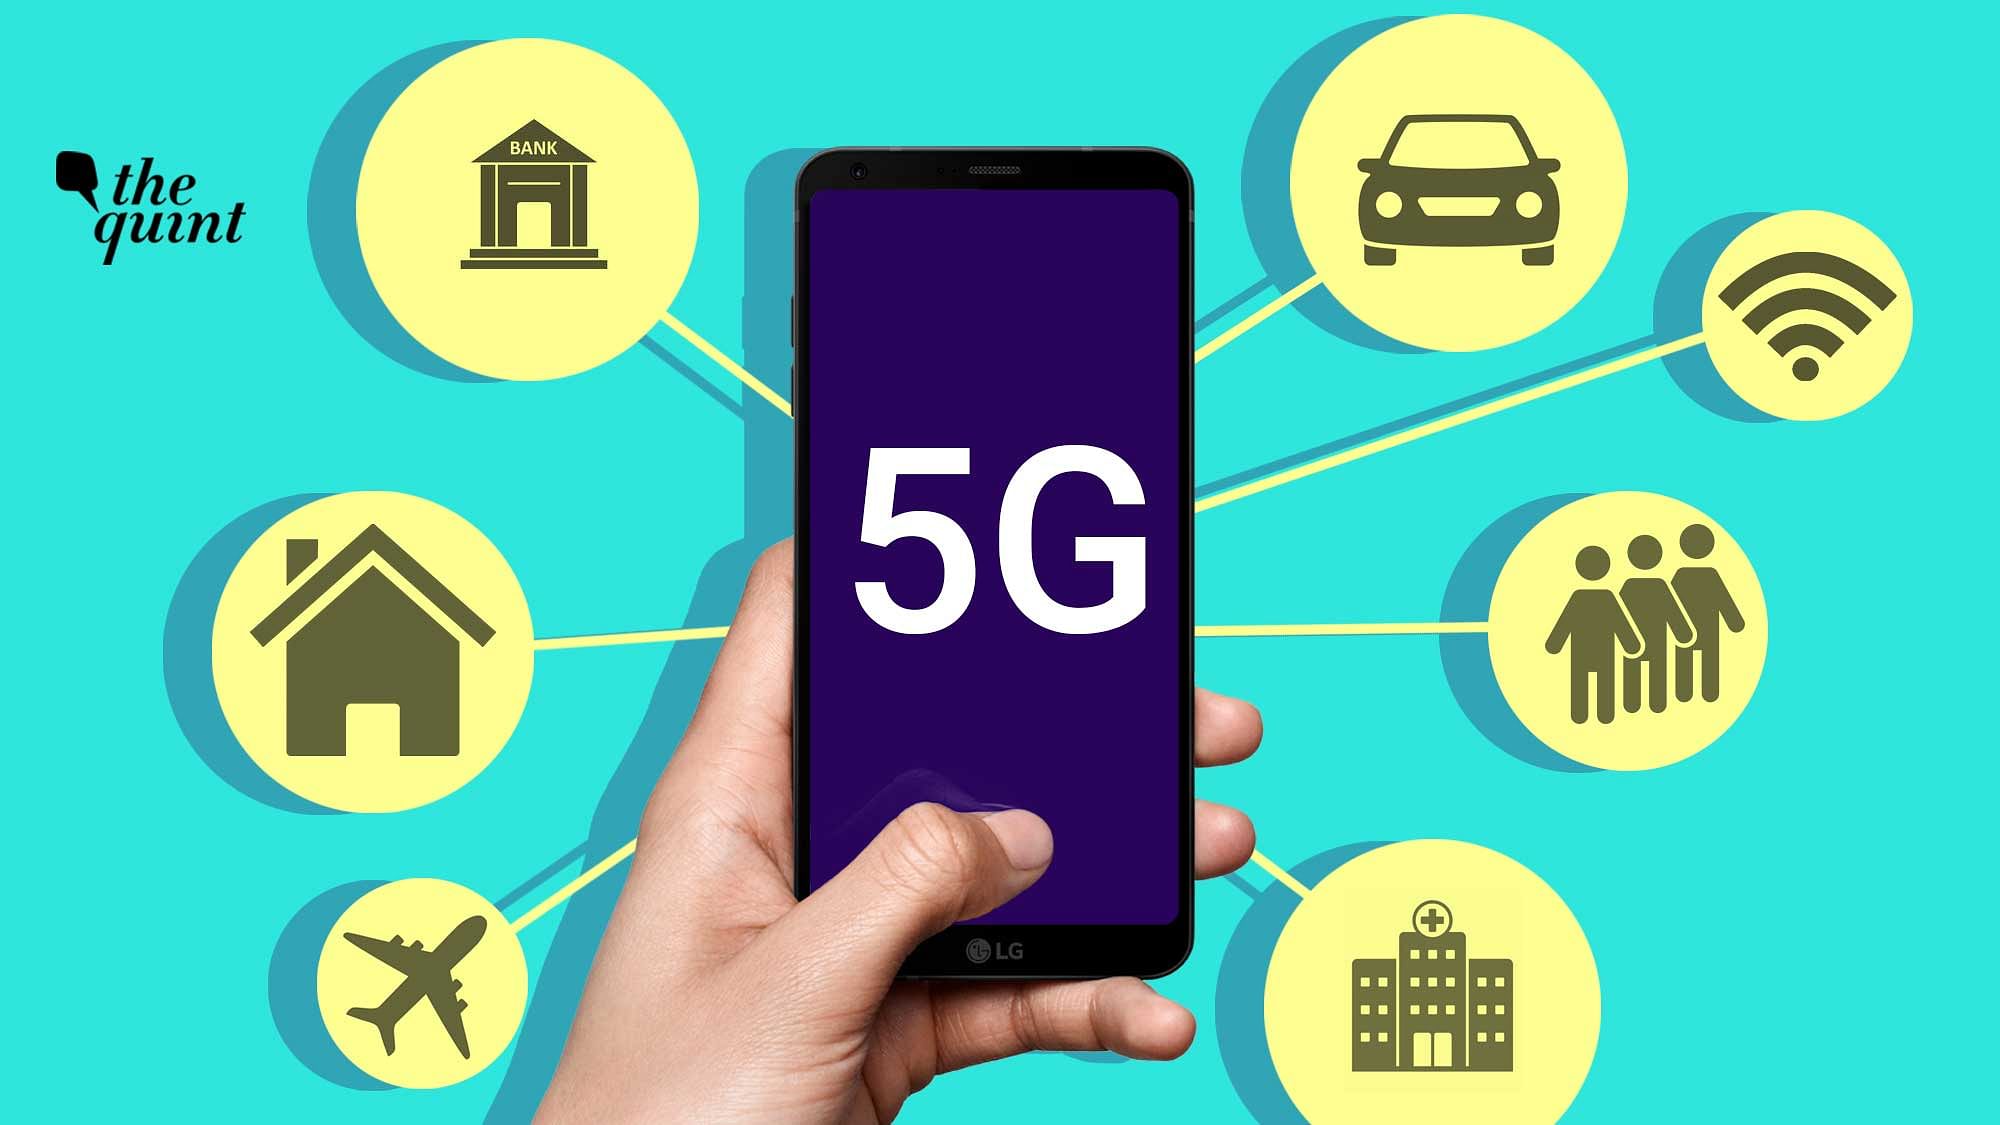 On 5G “India has not moved beyond the modest beginning stage as compared to other countries in the world,” the Parliamentary IT Committee report said